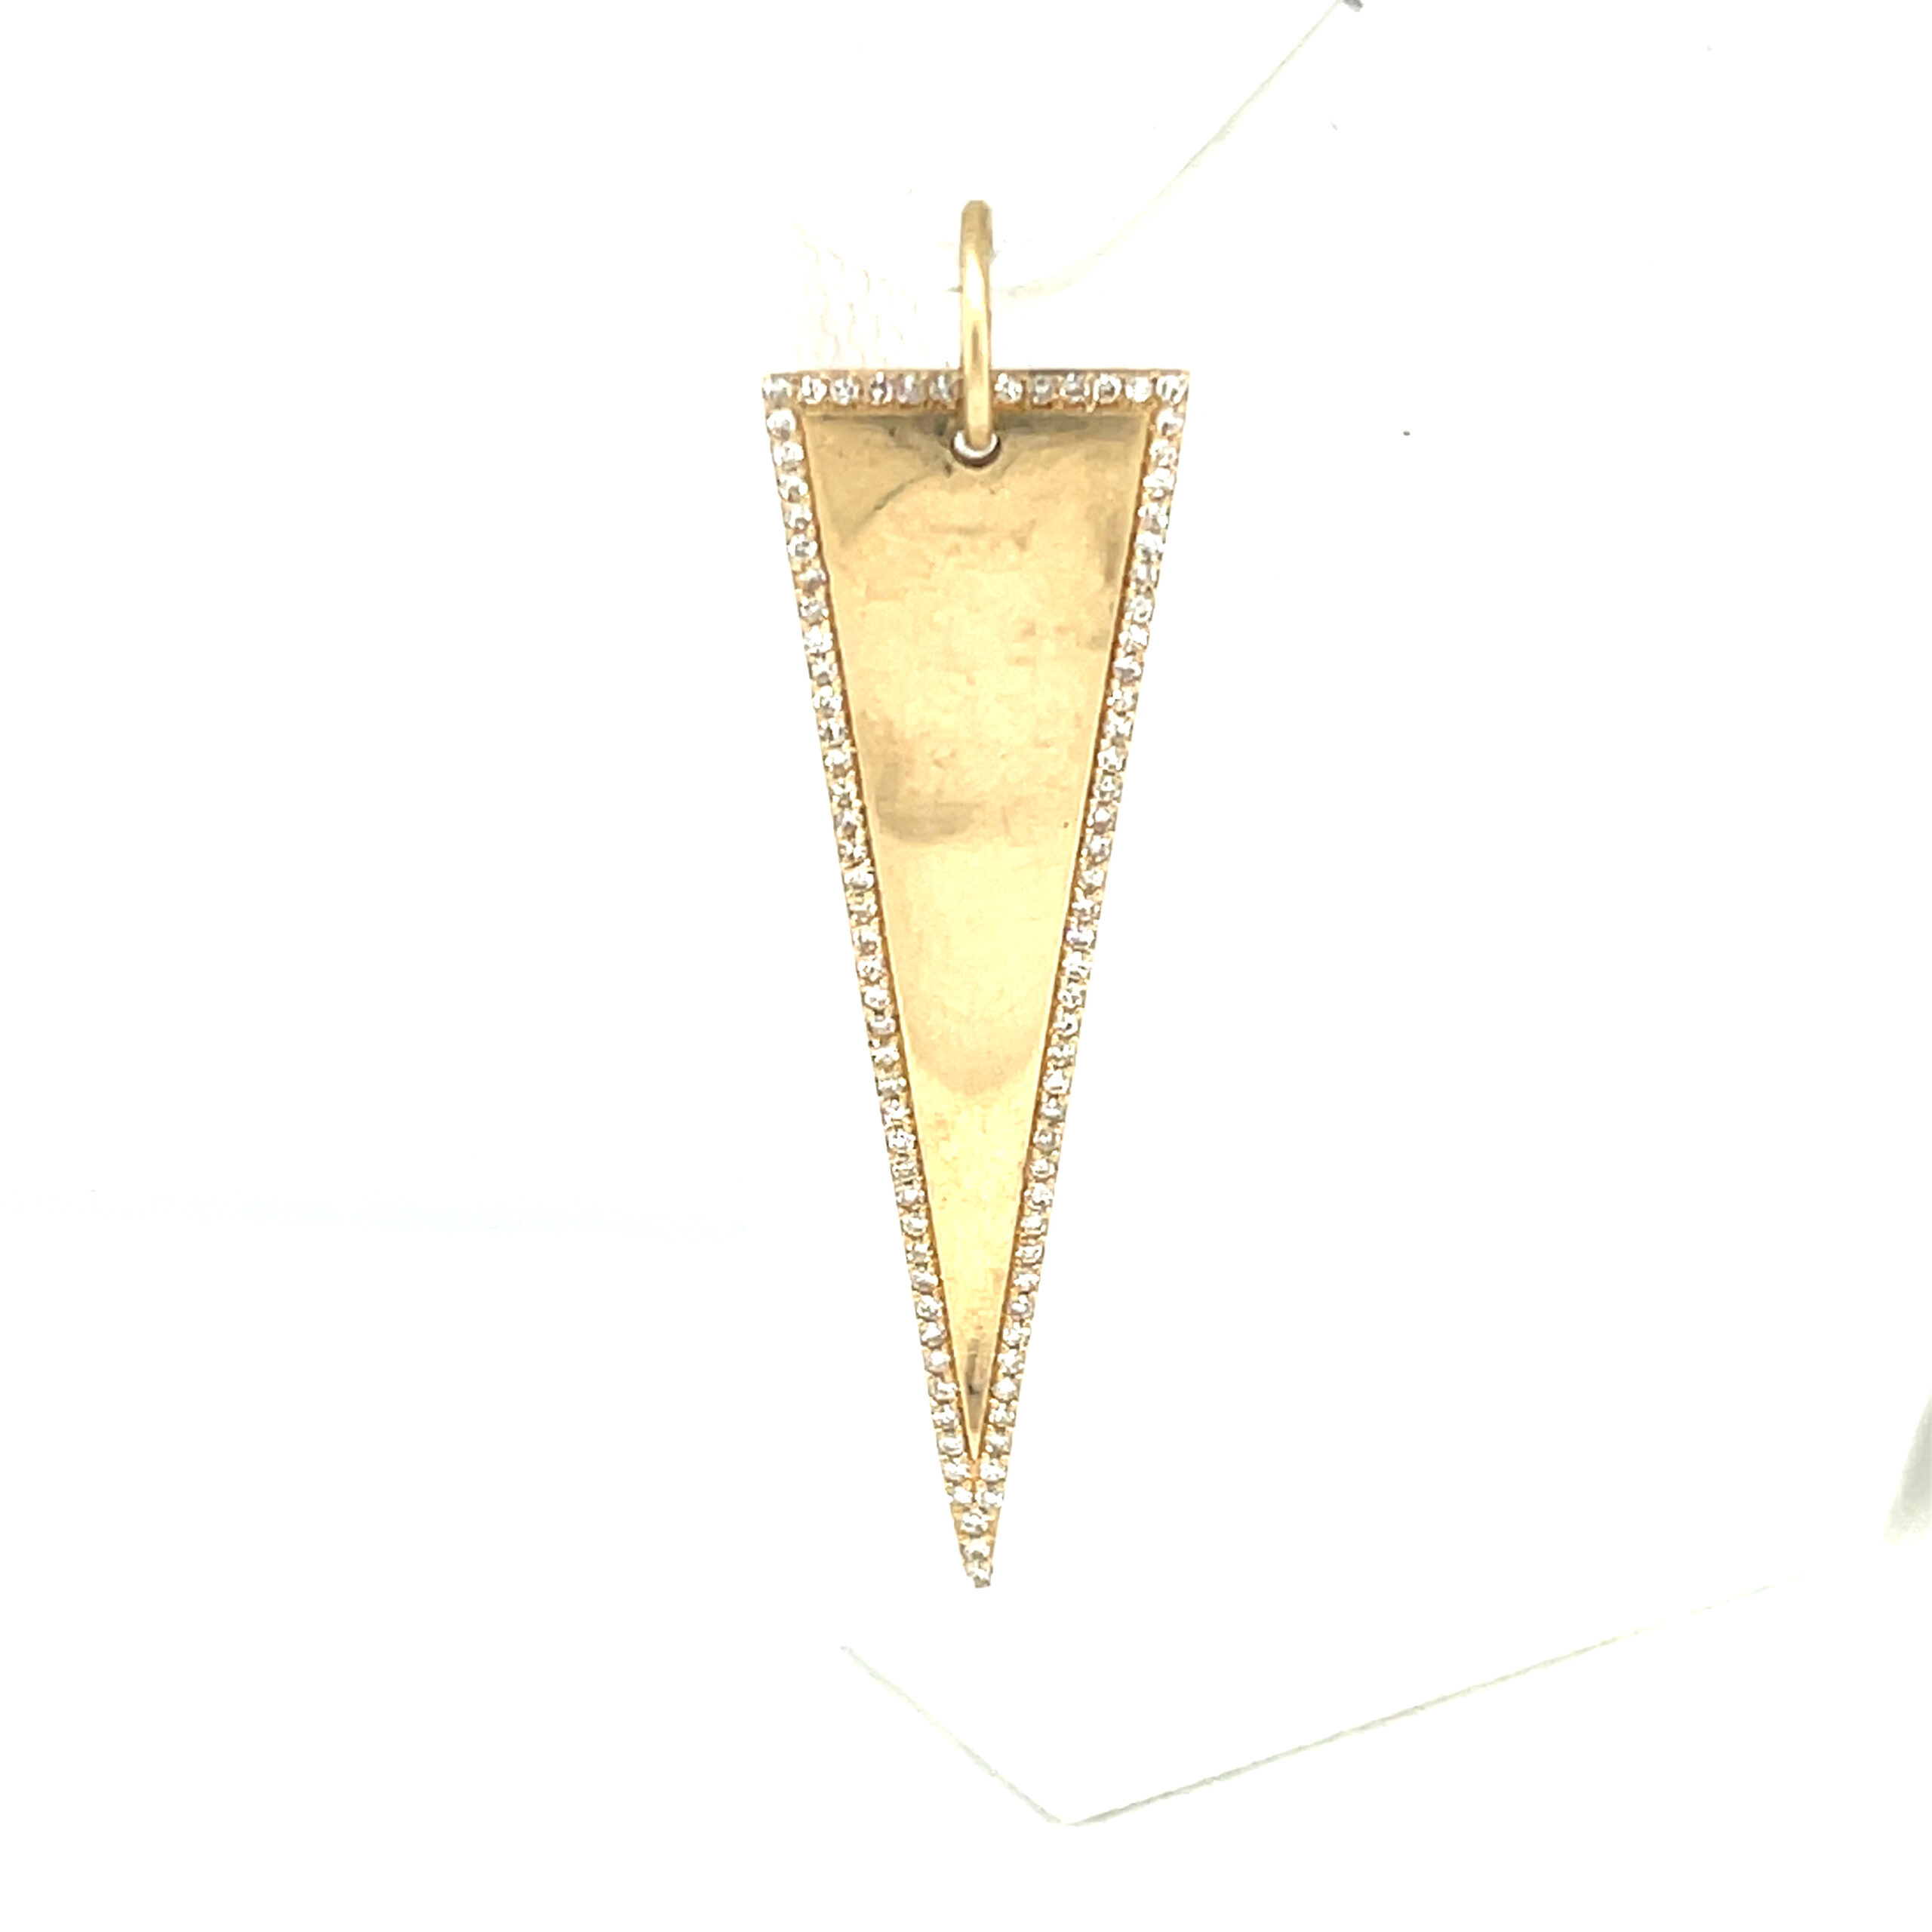 Featured image for “Elongated Triangle Charm”